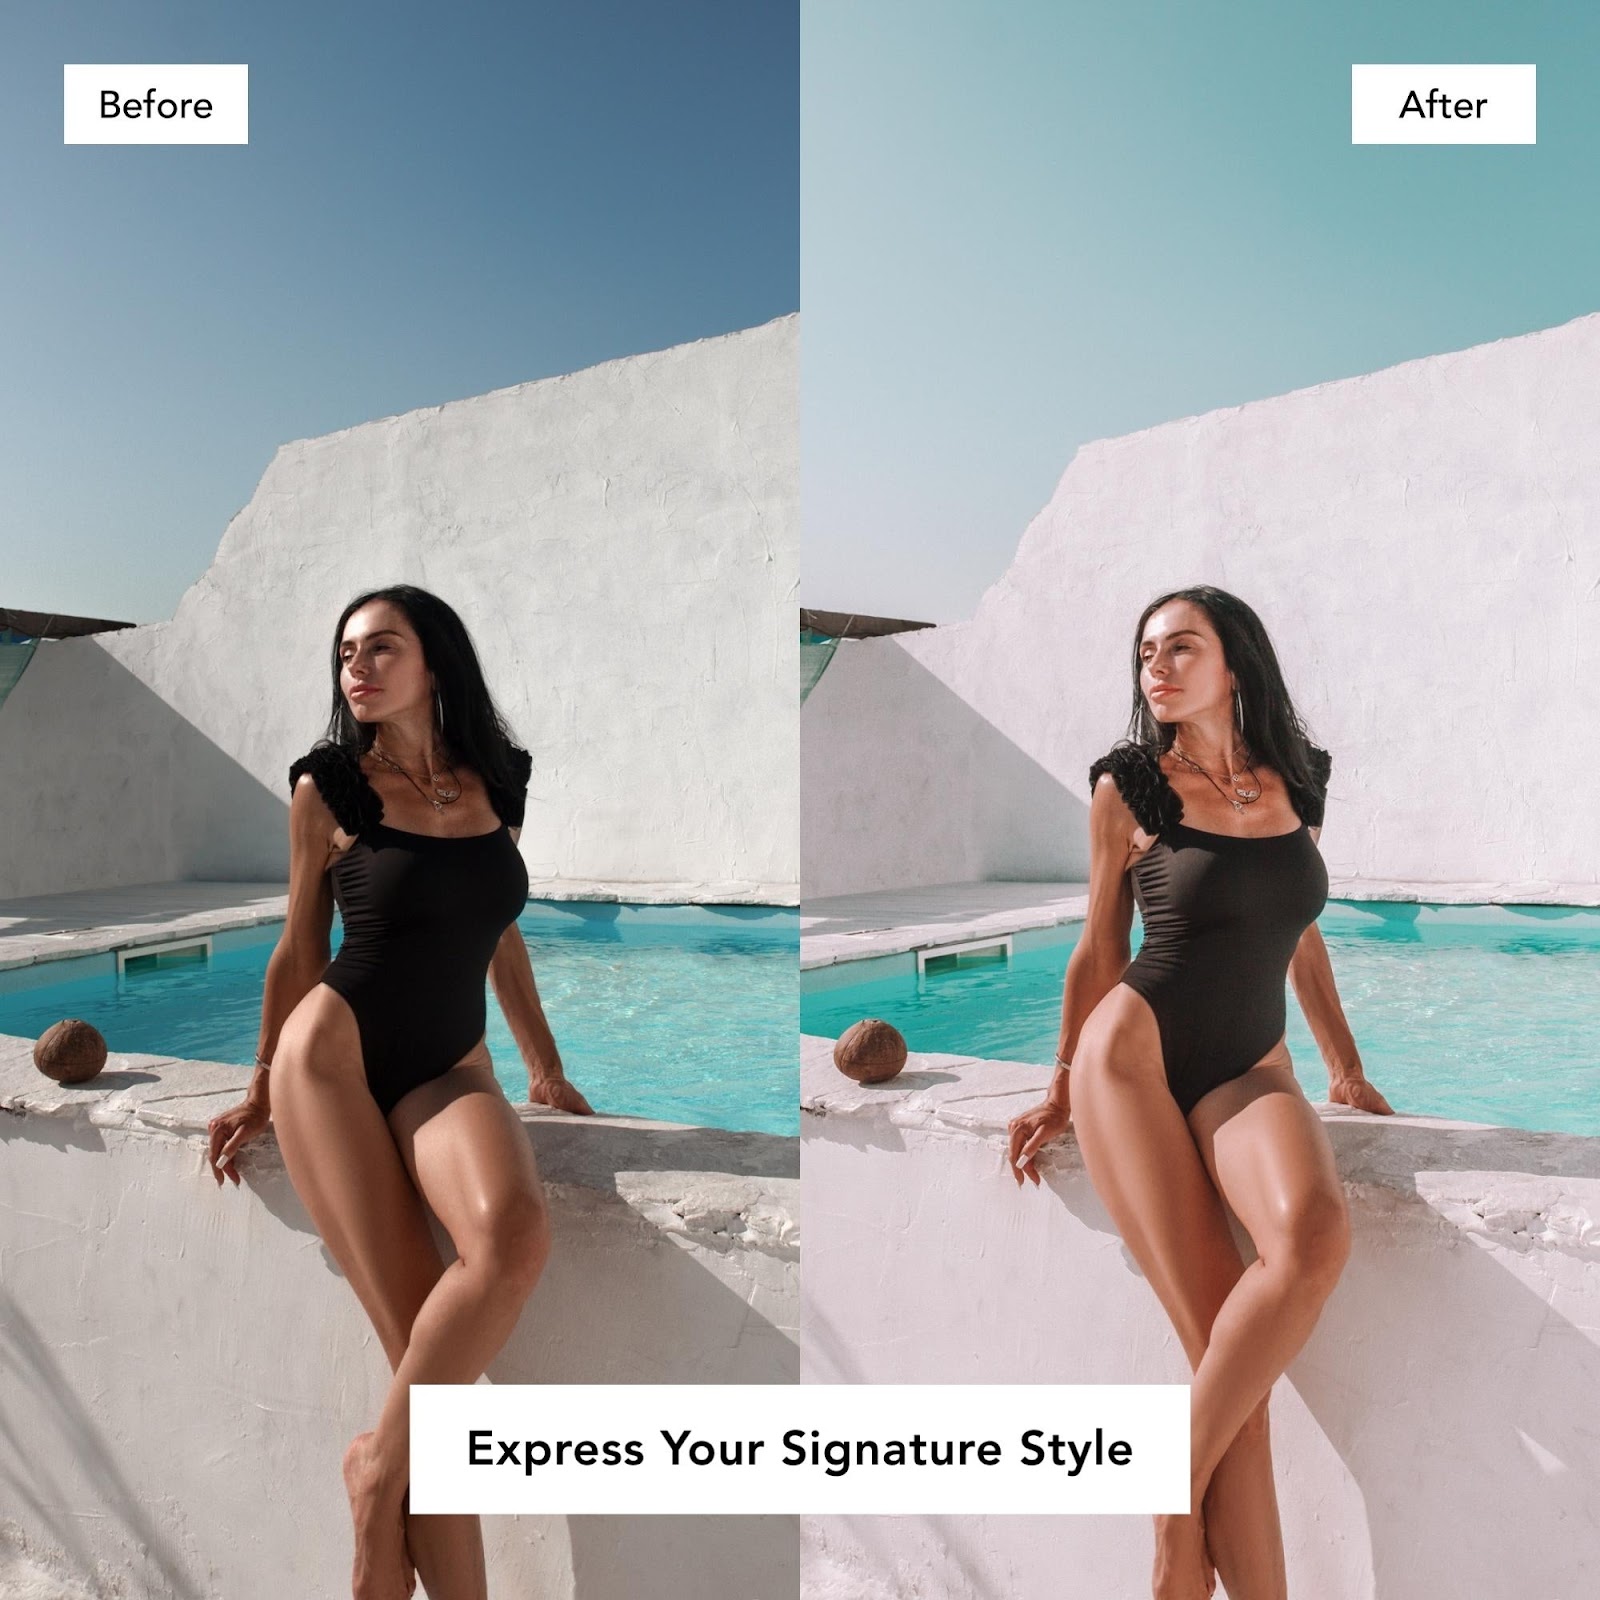 summer paradise flourish presets cover grid before after